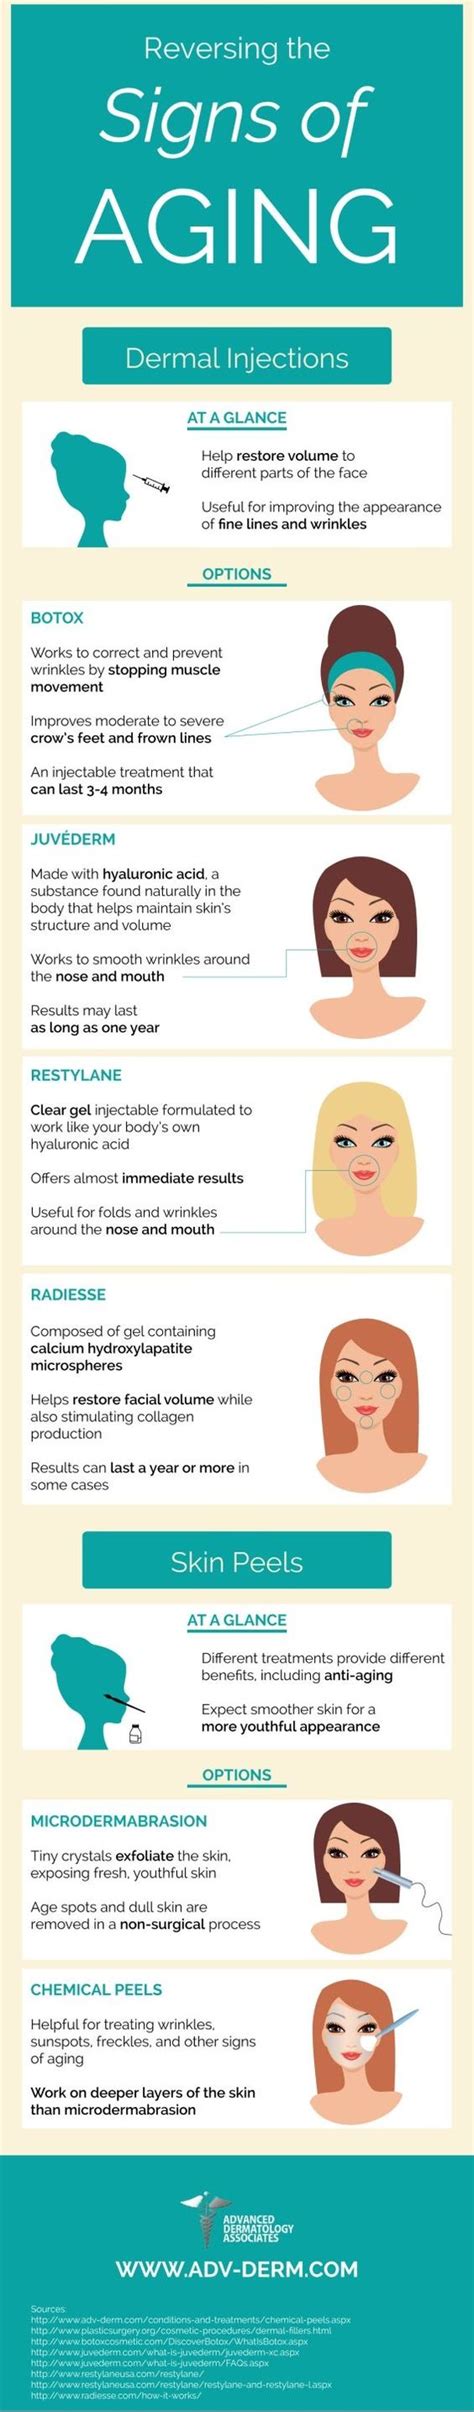 Usual Ways To Reverse The Signs Of Aging Infographic